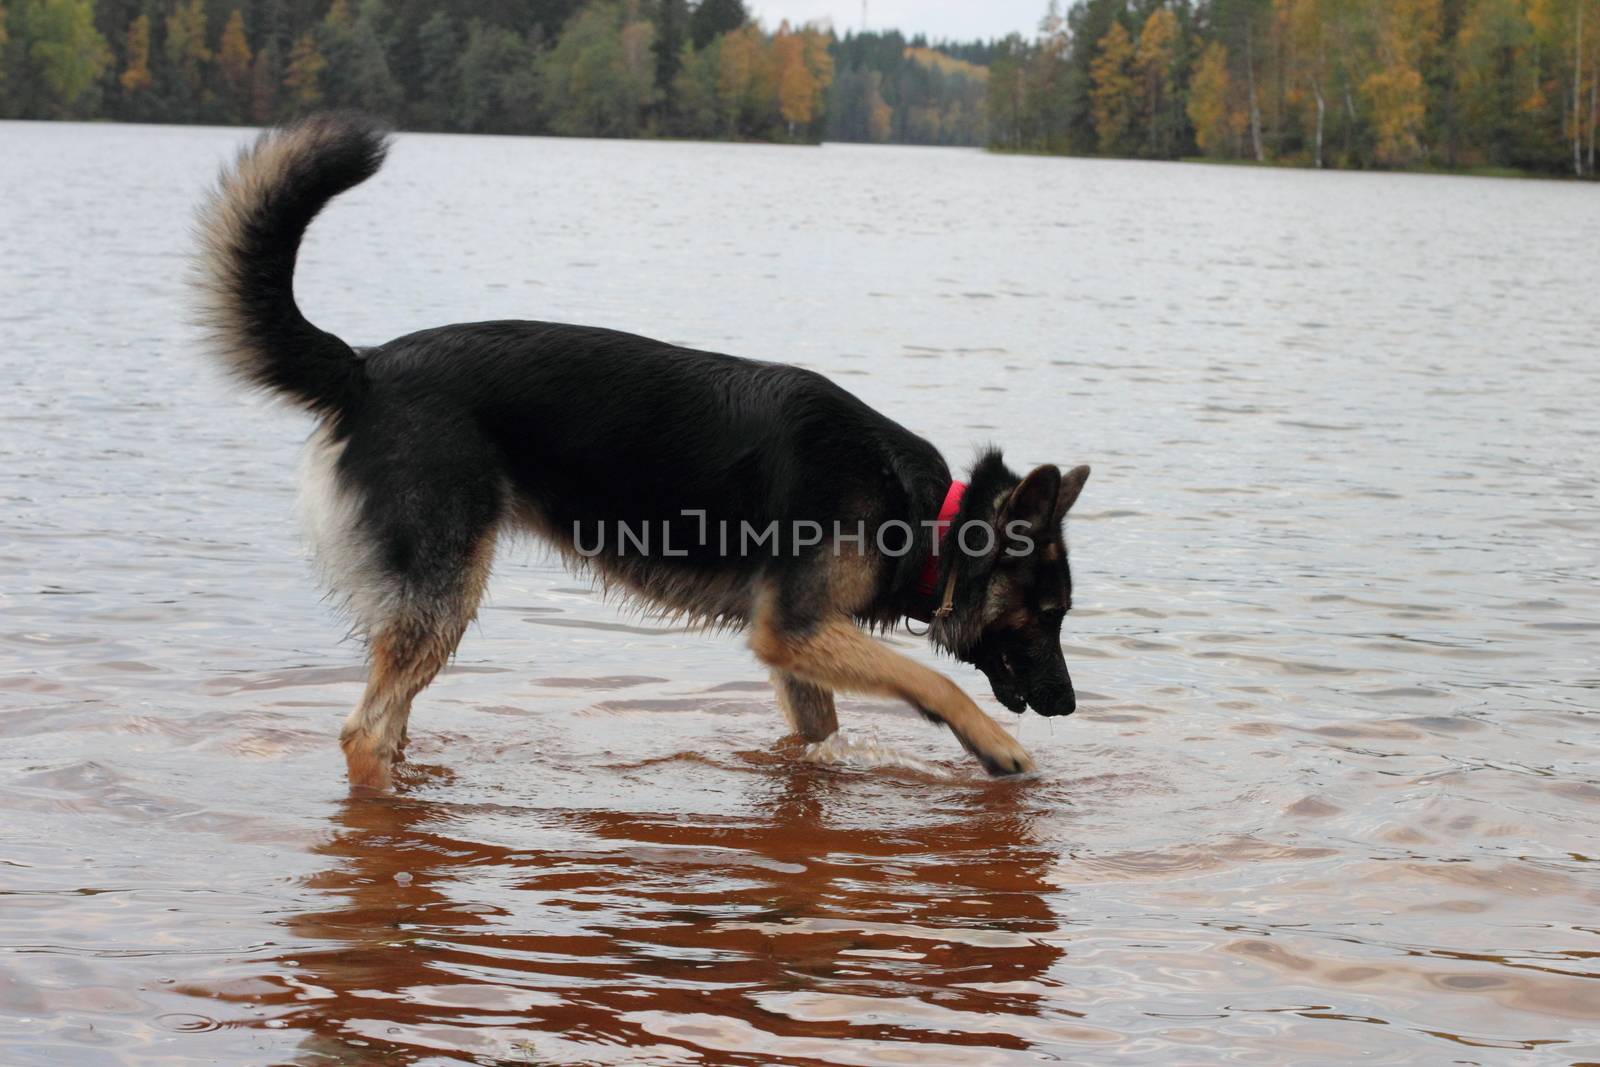 German Shepherd Dog in the lake in the fall. Forest and reflecting surface of water